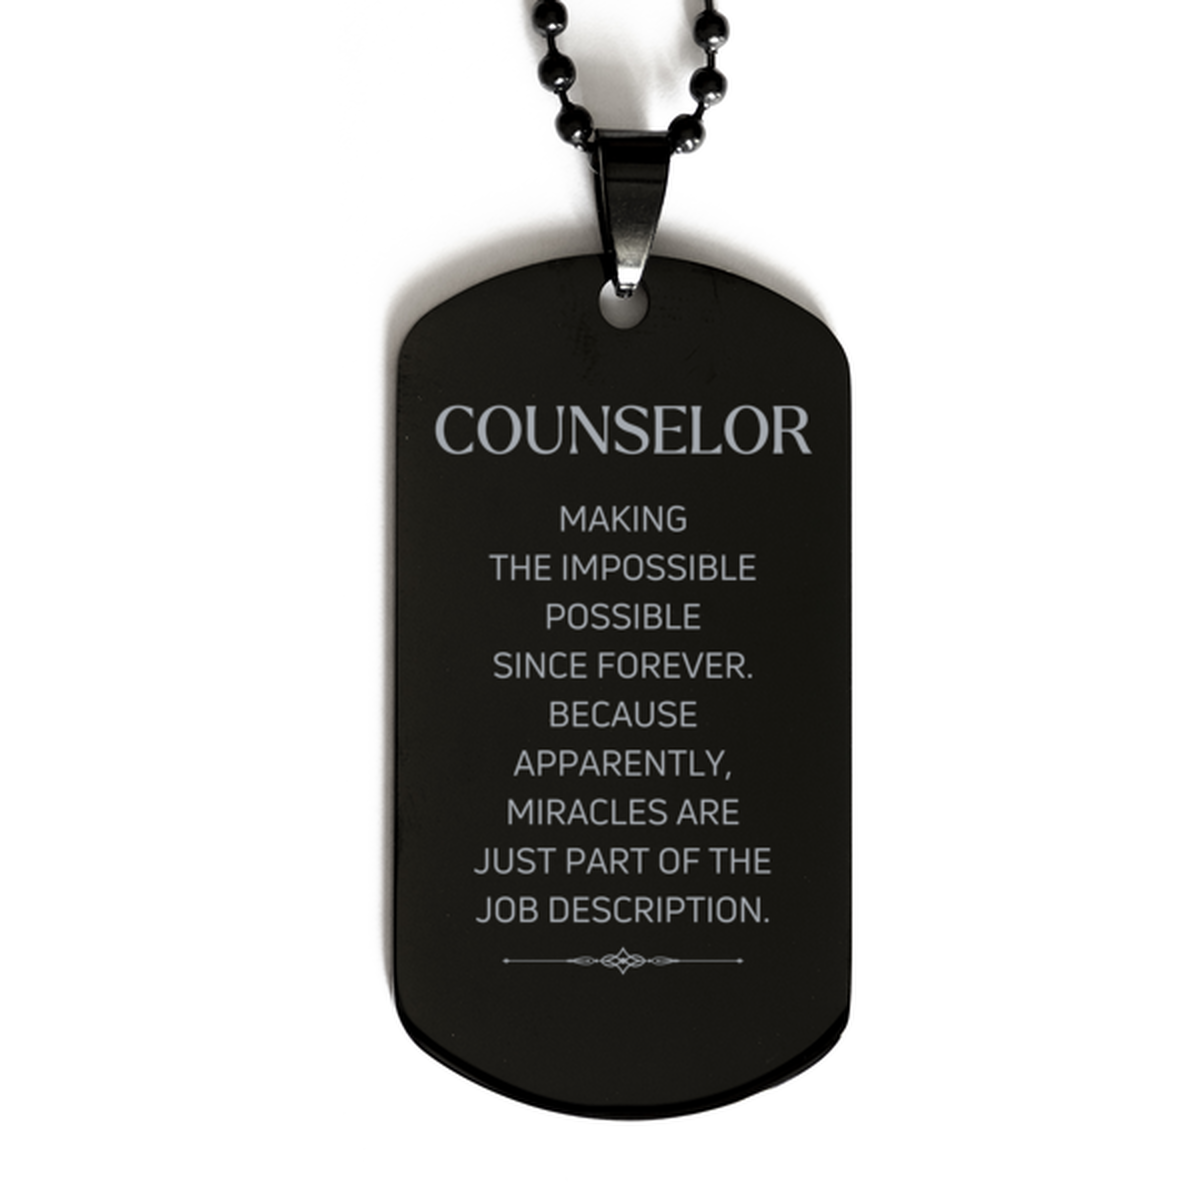 Funny Counselor Gifts, Miracles are just part of the job description, Inspirational Birthday Black Dog Tag For Counselor, Men, Women, Coworkers, Friends, Boss